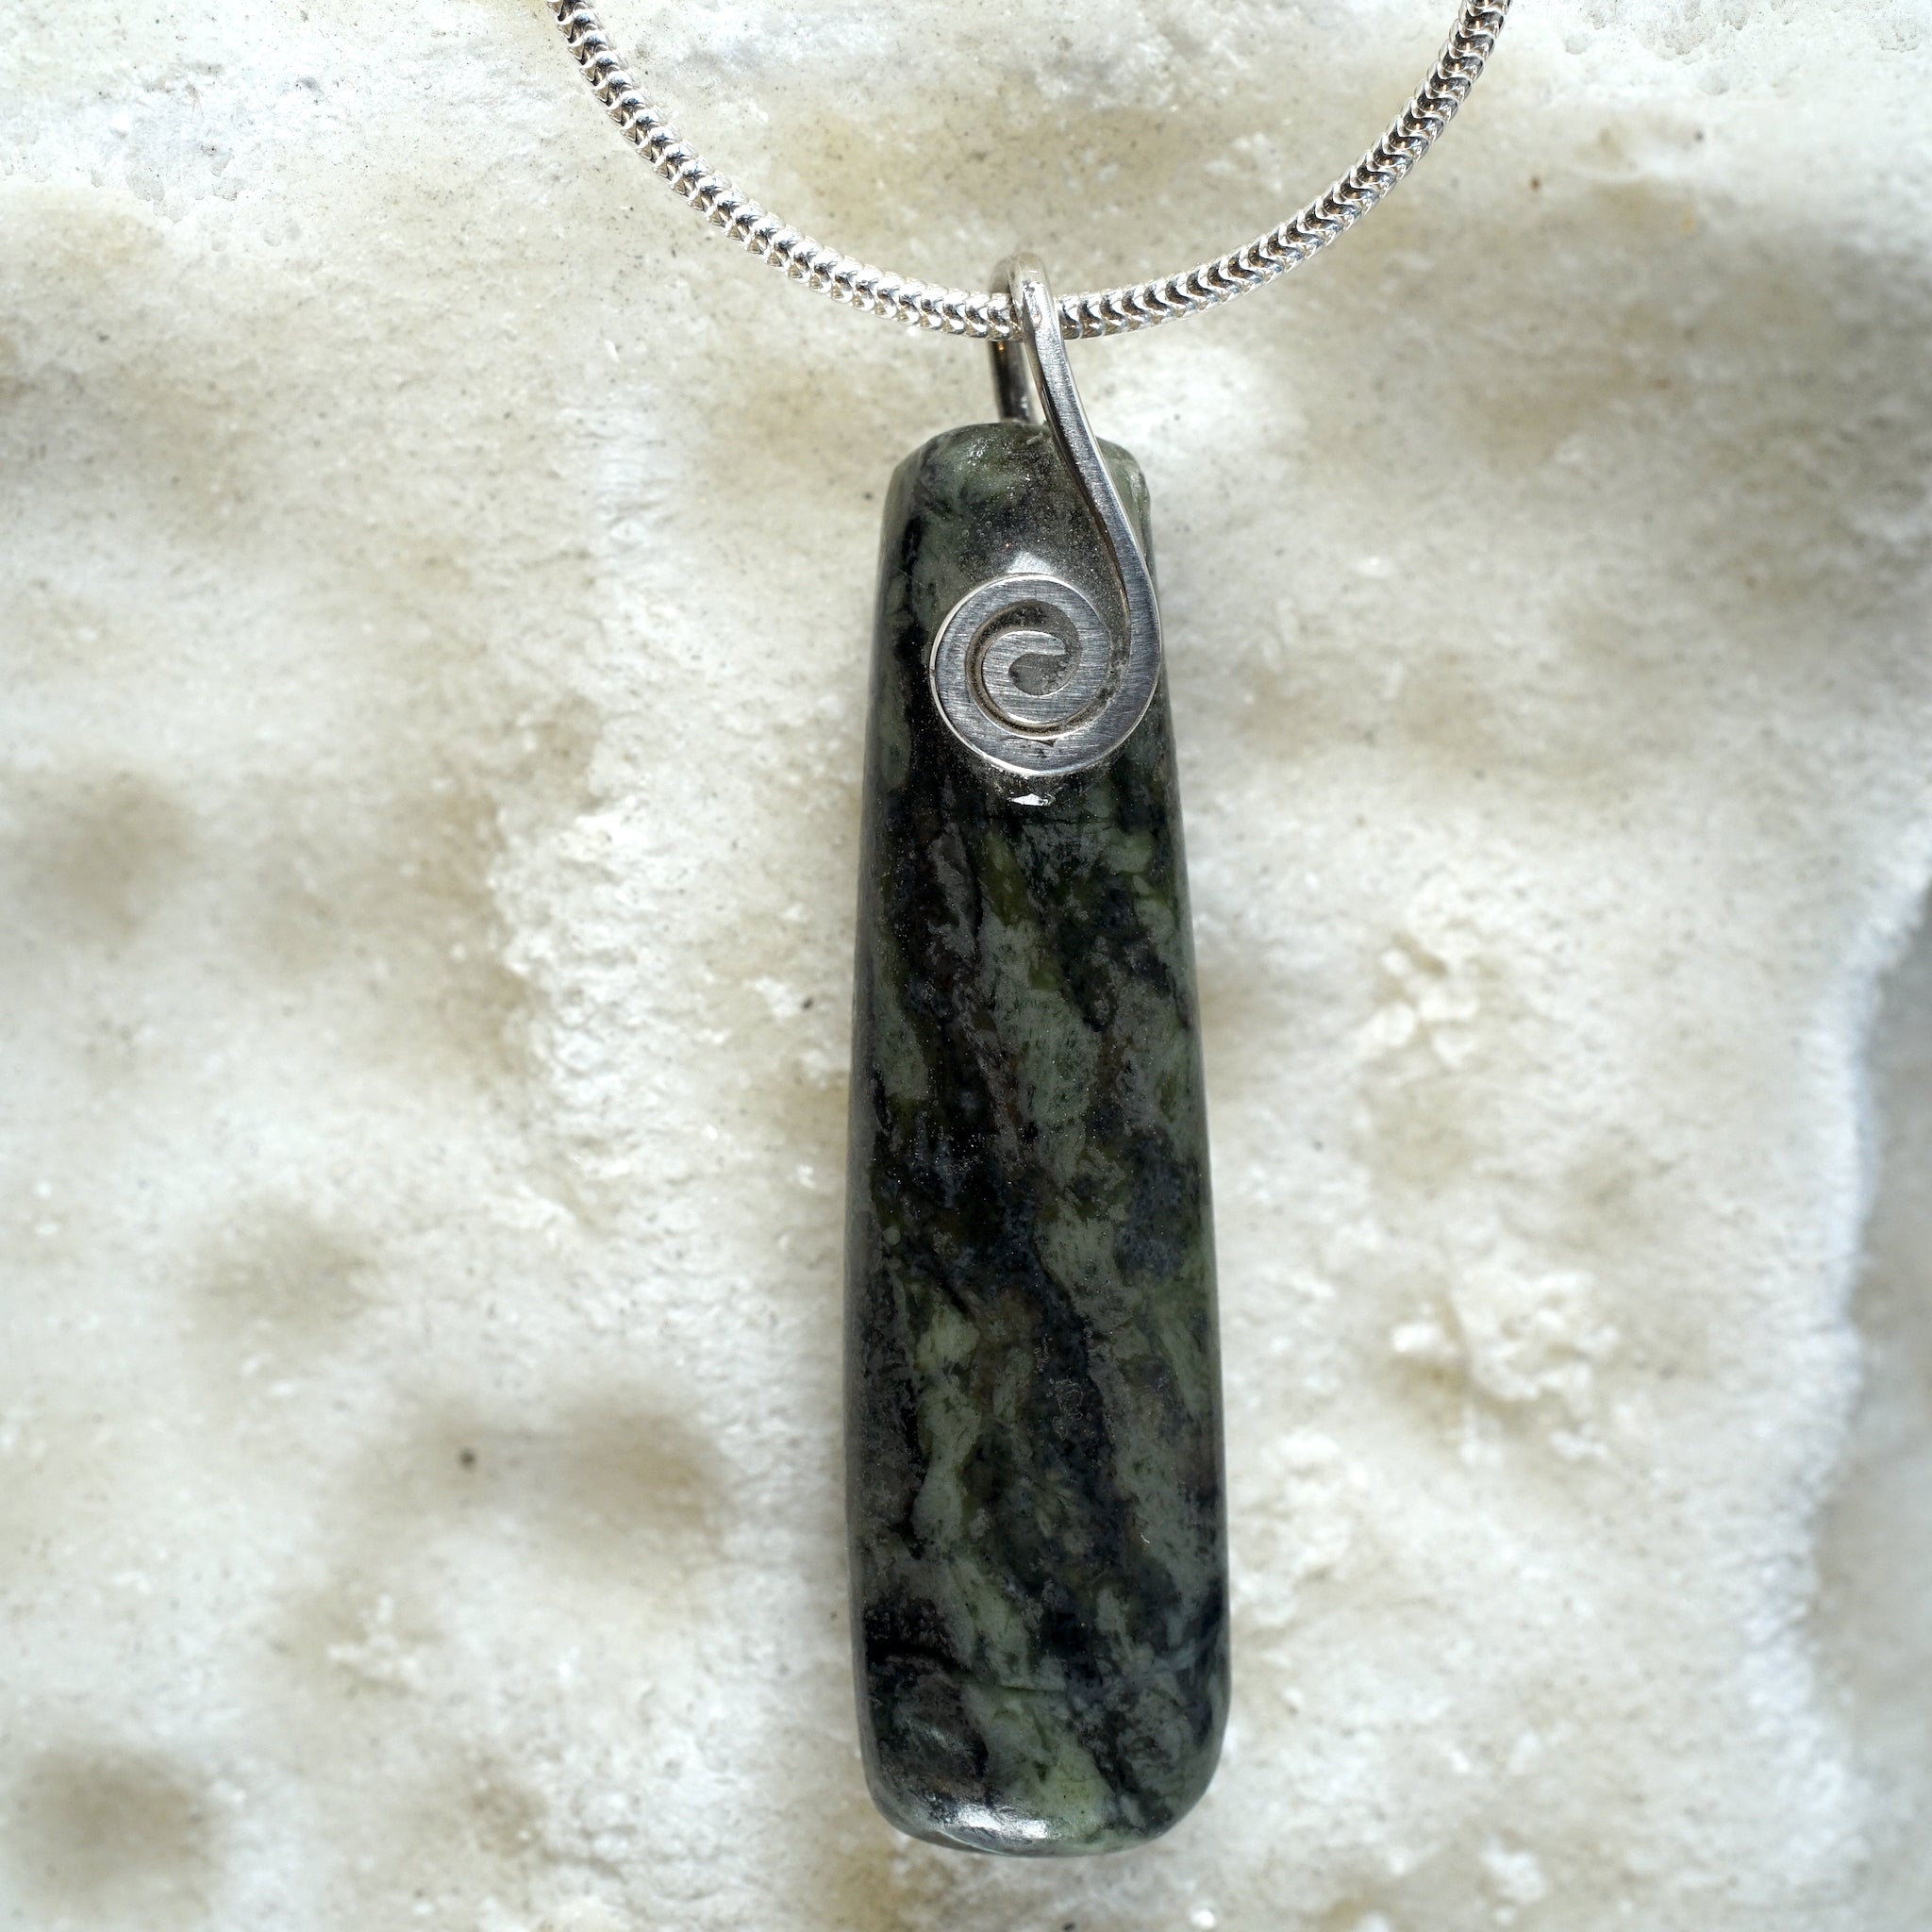 Connemara Marble Narrow rectangle pendant with a sterling silver celtic spiral from Angela Kelly Jewellery Enniskillen Fermanagh